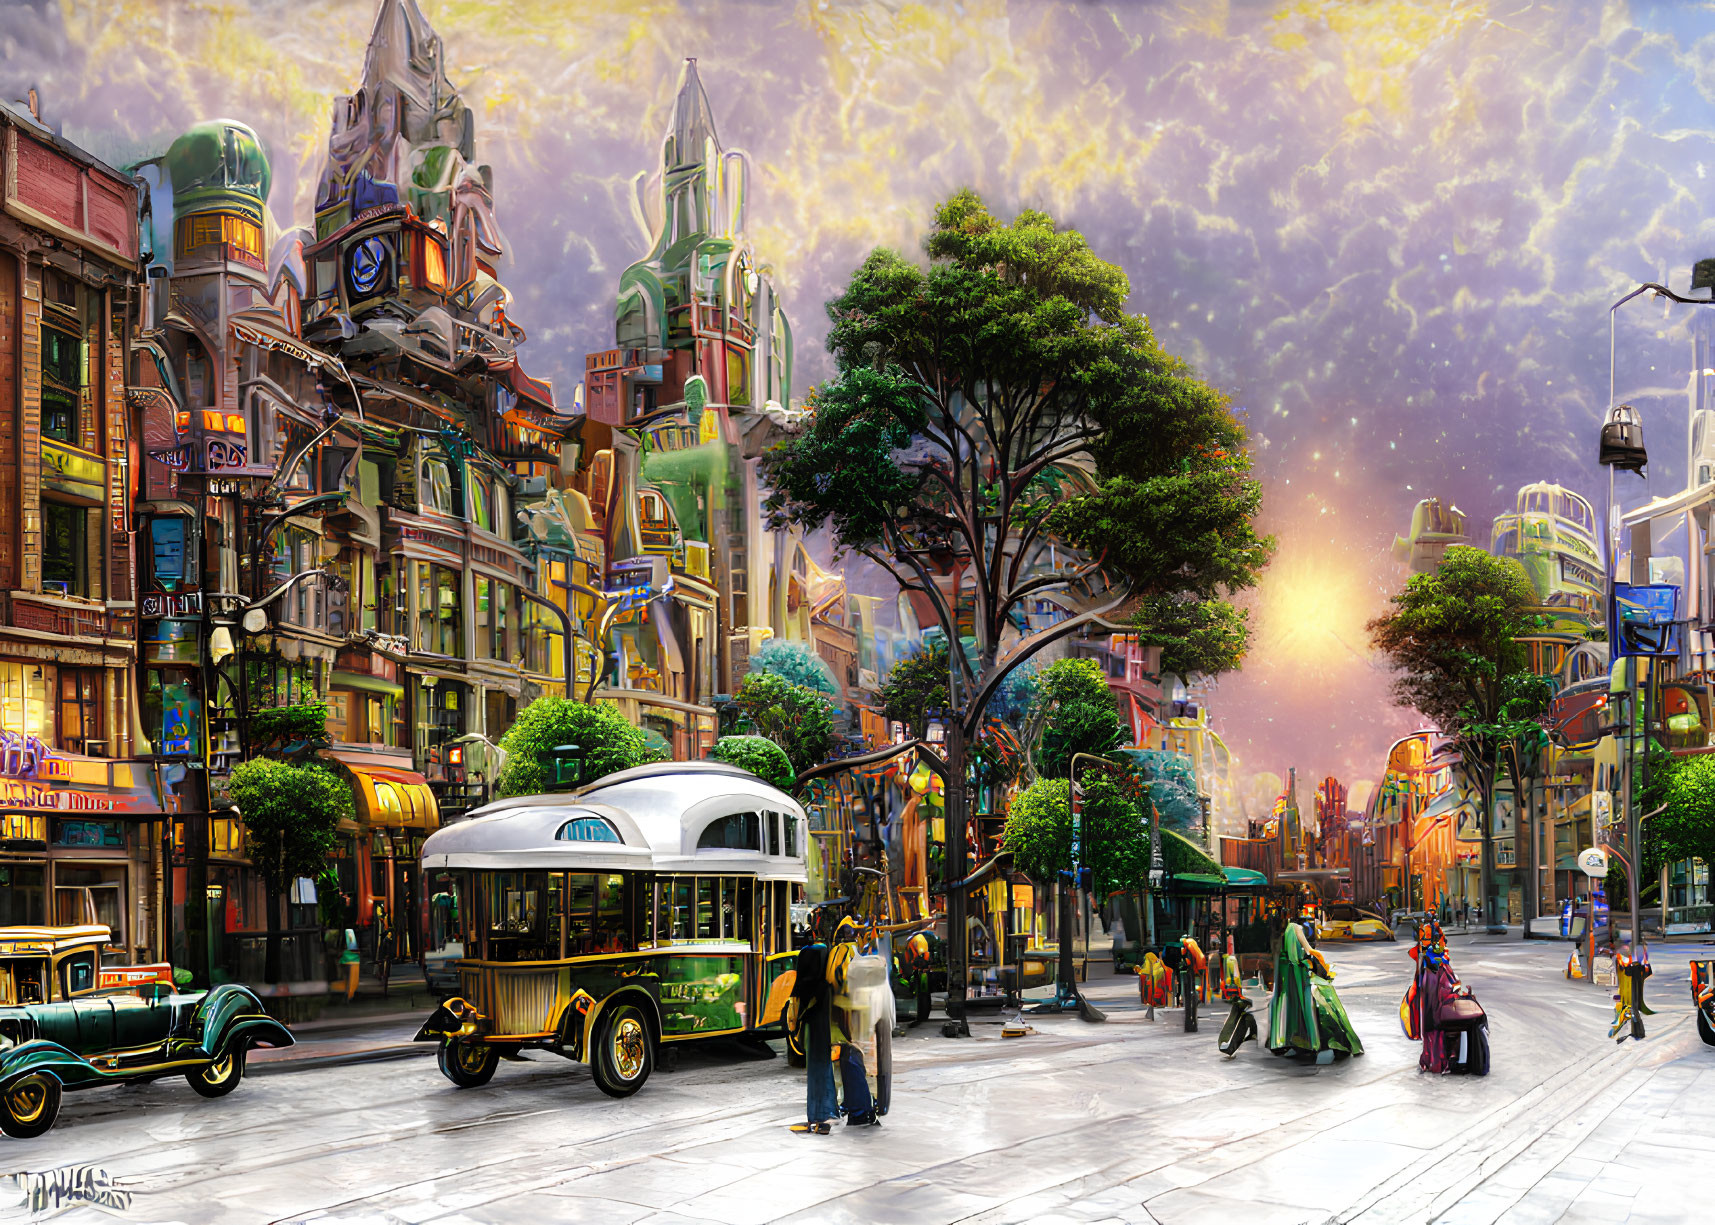 Retro-futuristic city street with vintage cars and tram under sunset sky